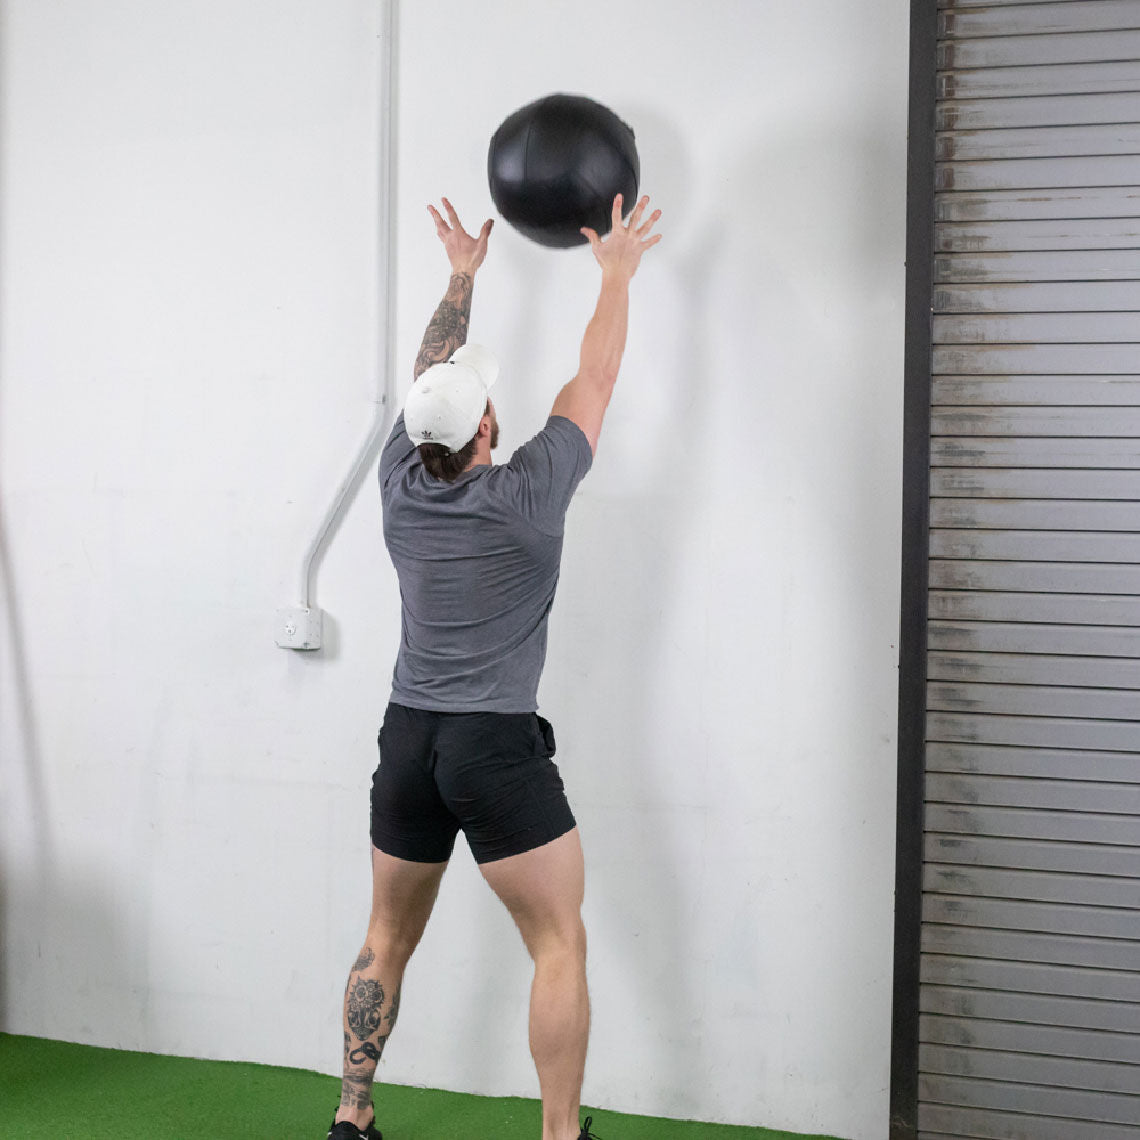 18 LB Composite Wall Ball - view 2